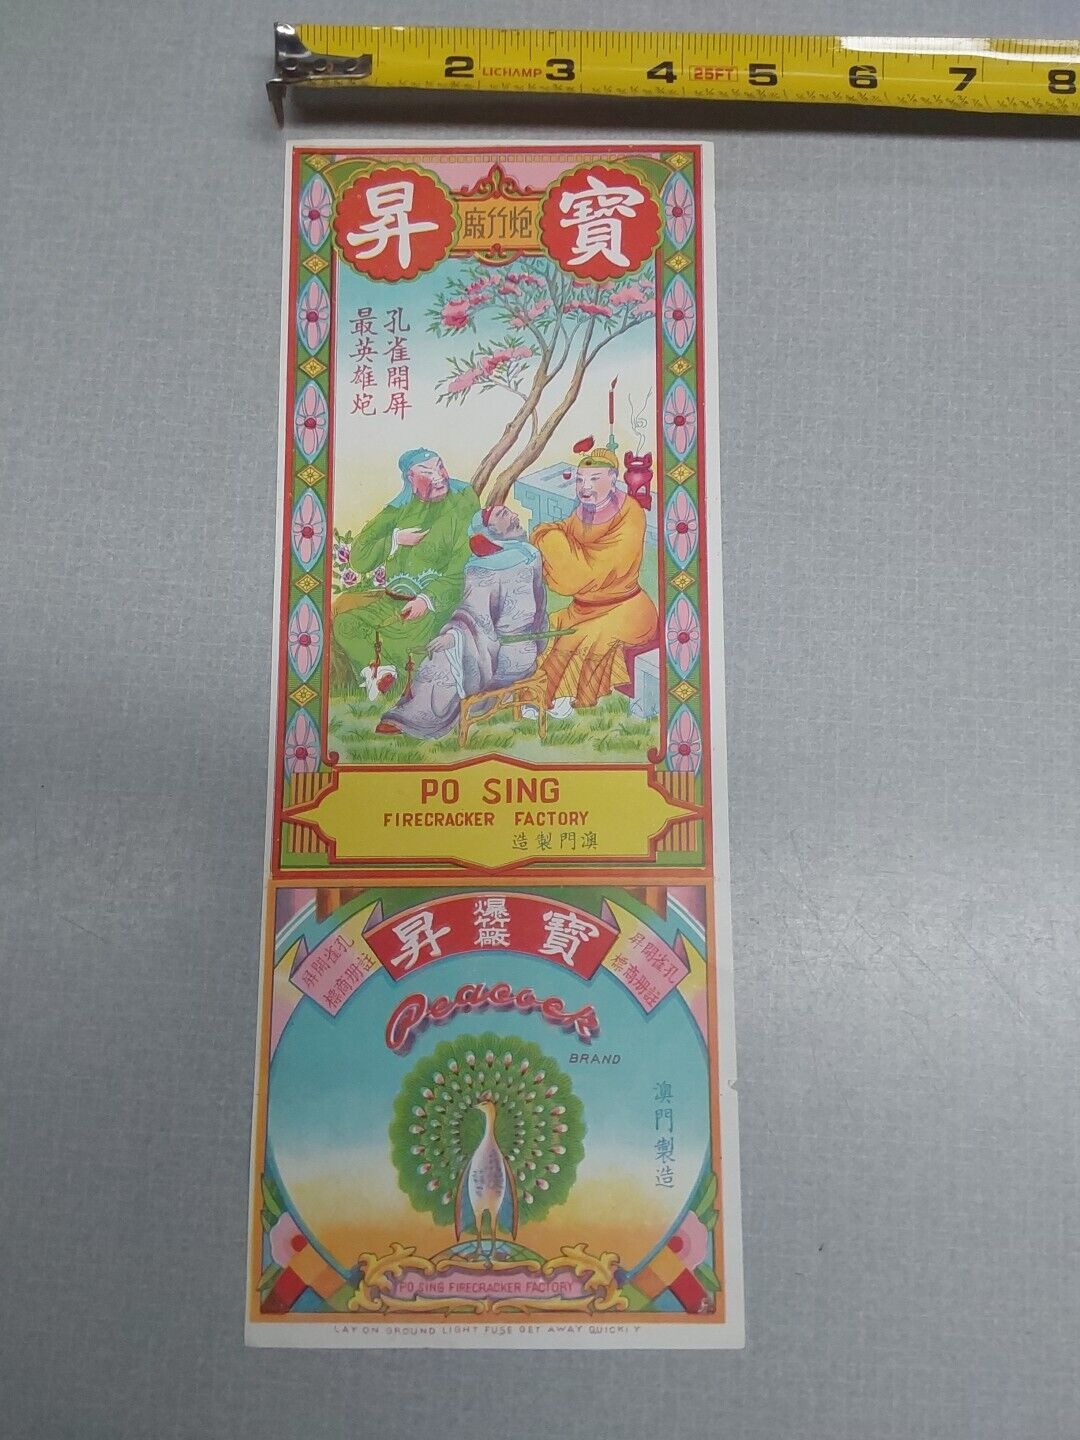 Peacock FirecrackerLabels 1950s Vintage Paper Label Made In Macau Po Sing 